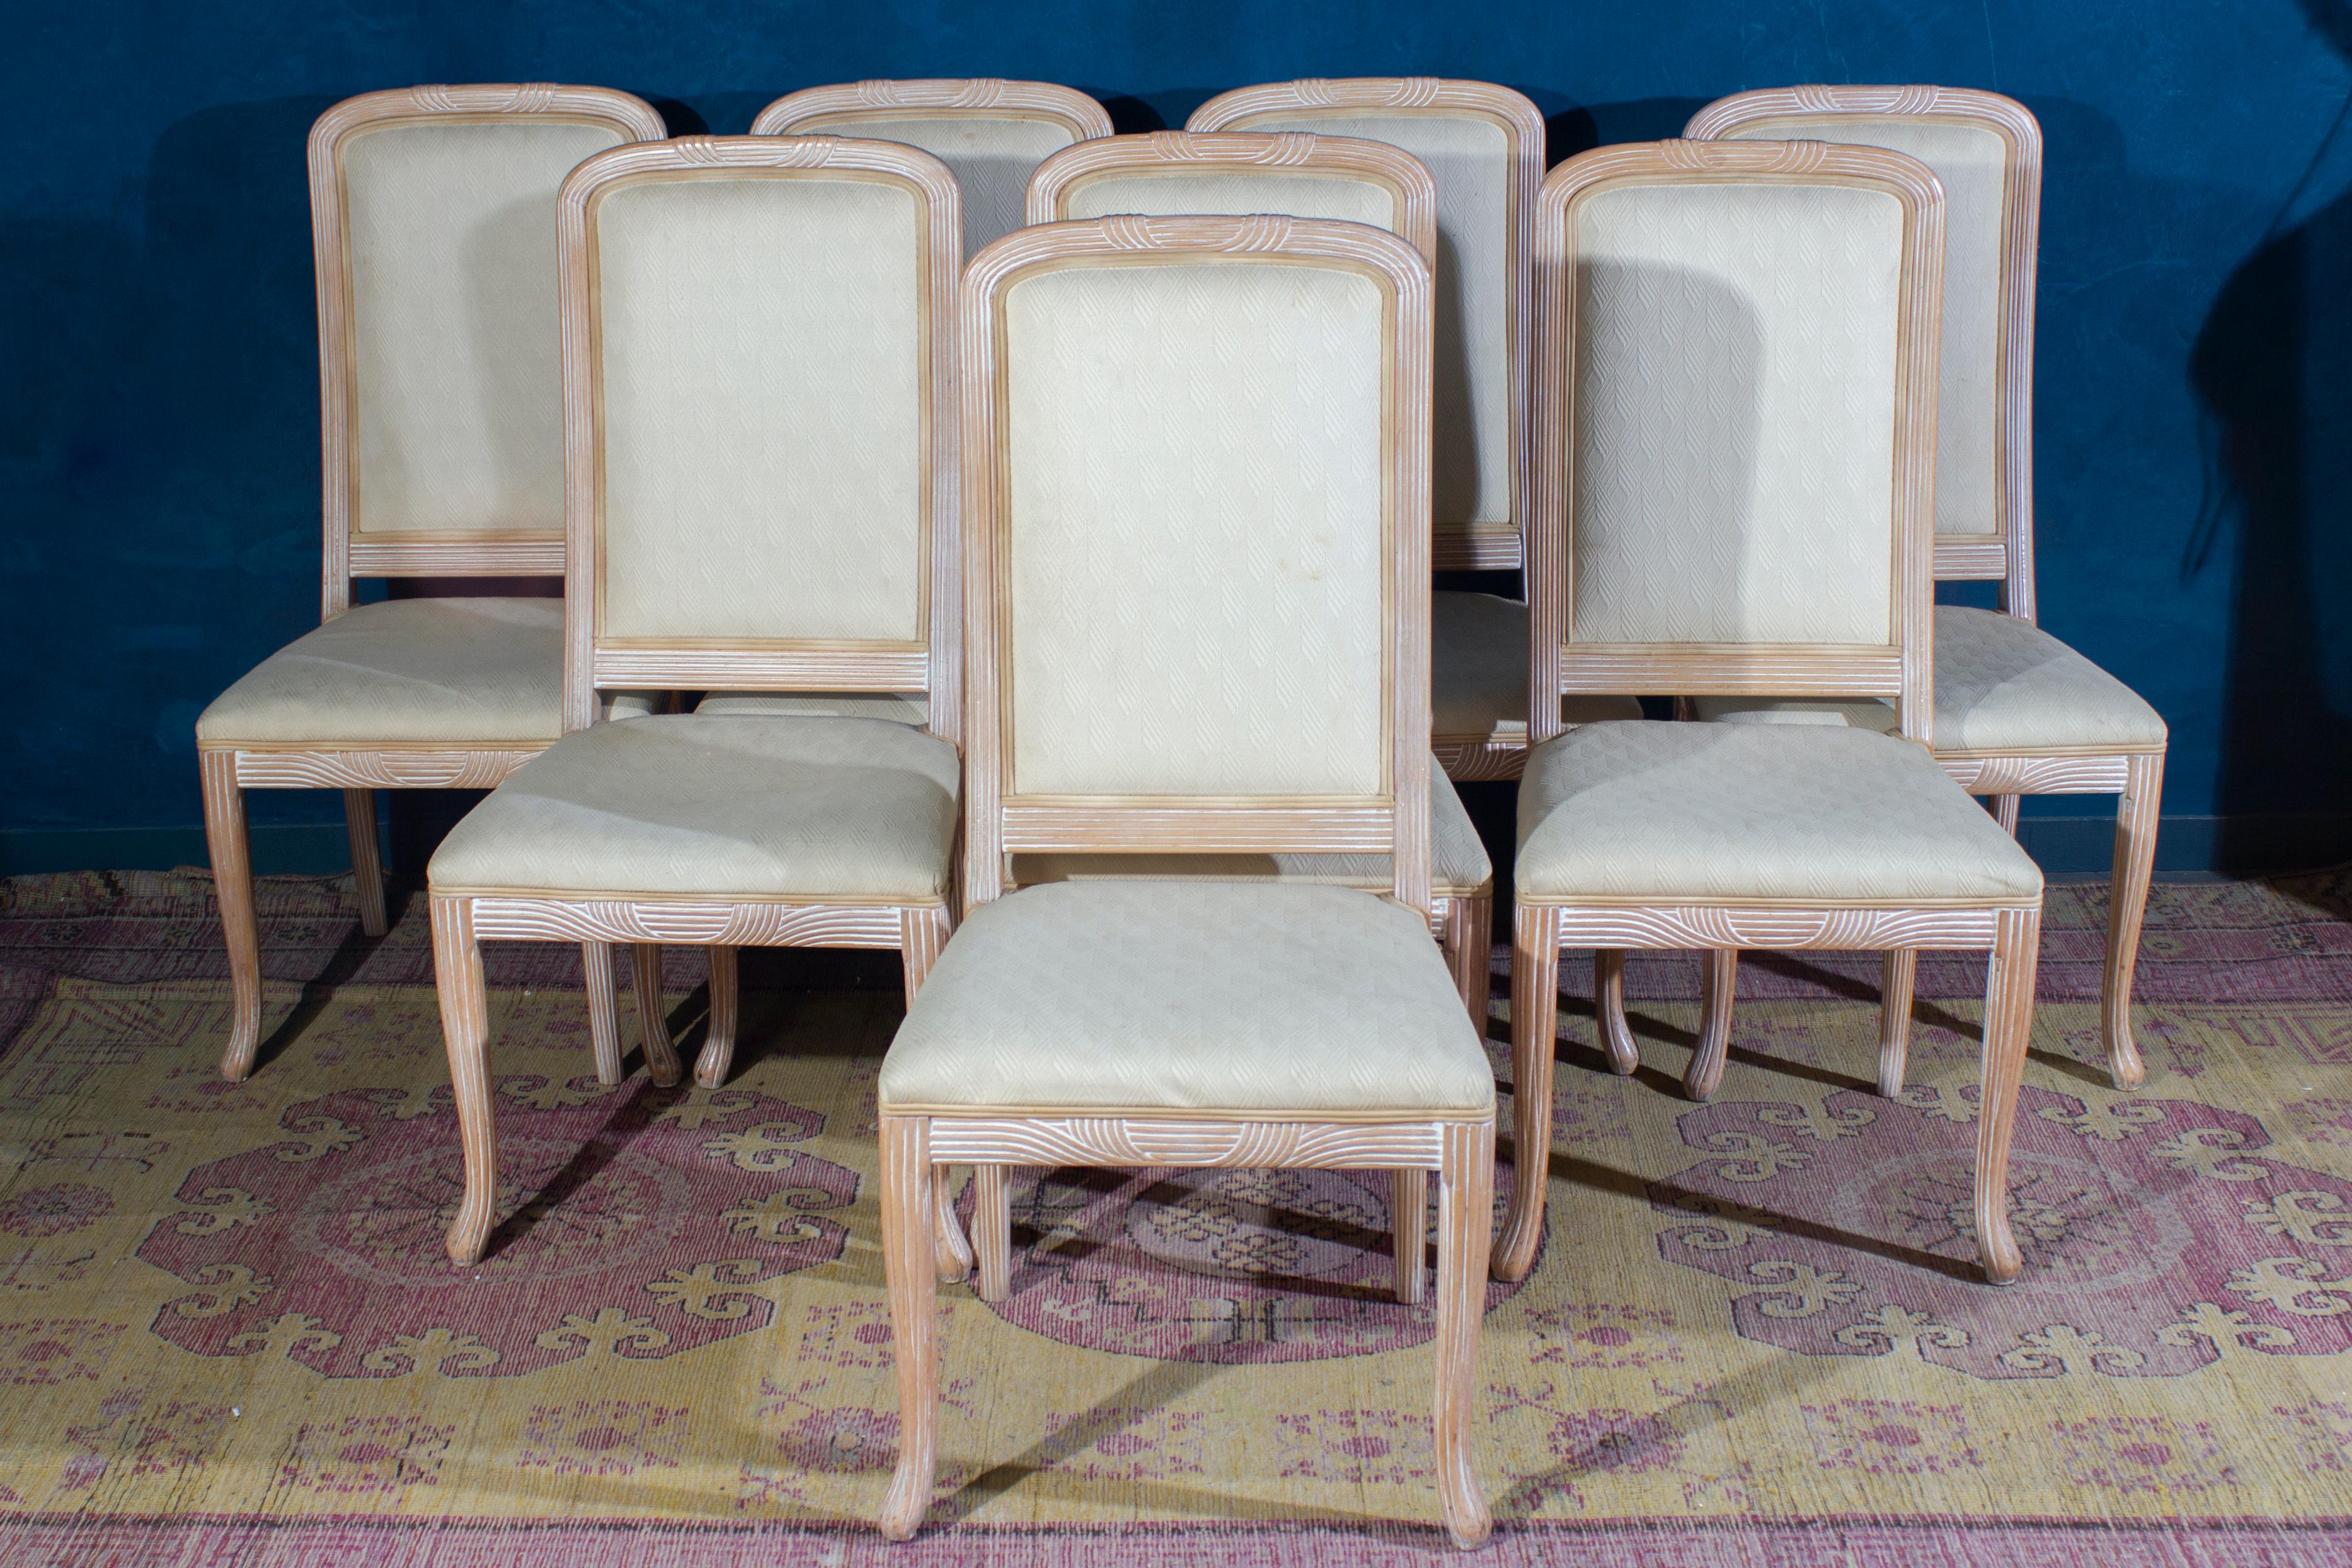 Set of eight Italian white decapè wood chairs with white upholstery seats.
Made in Italy 1970'. The wood is in perfect vintage condition. The upholstery is in very good condition only with the wear of time. 
Each chair has been masterfully